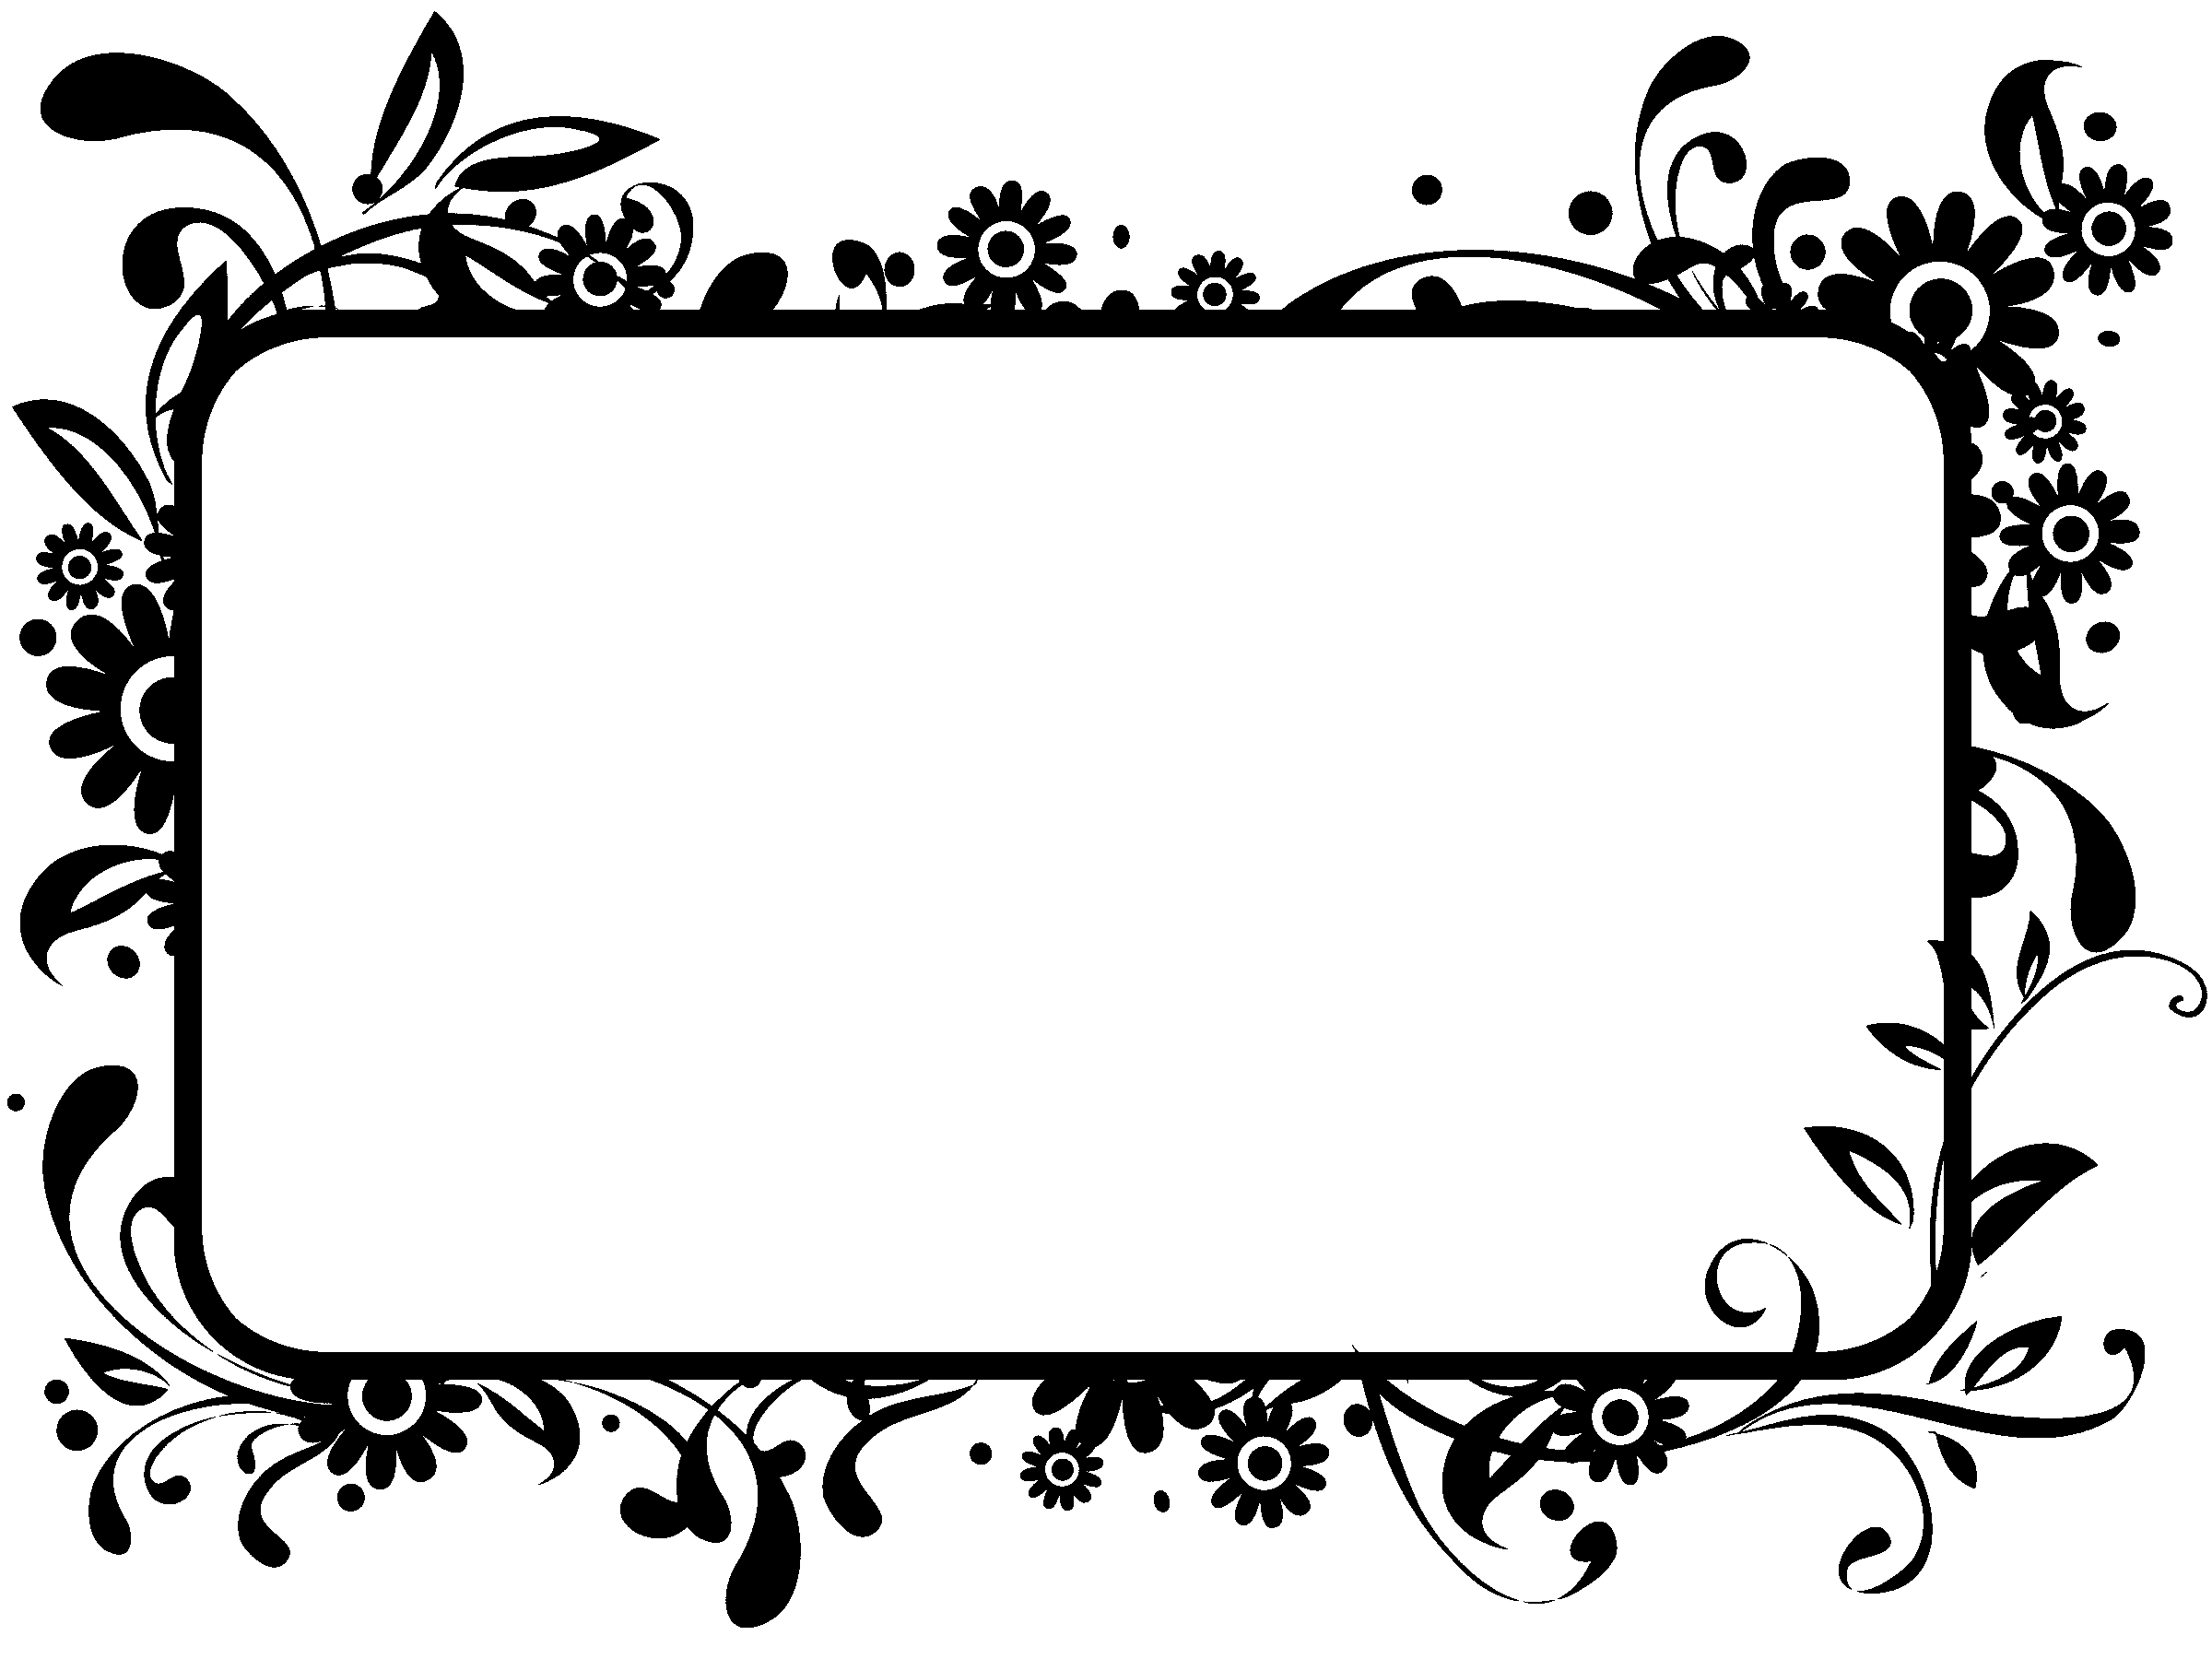 Marriage clipart border. Free cliparts borders download